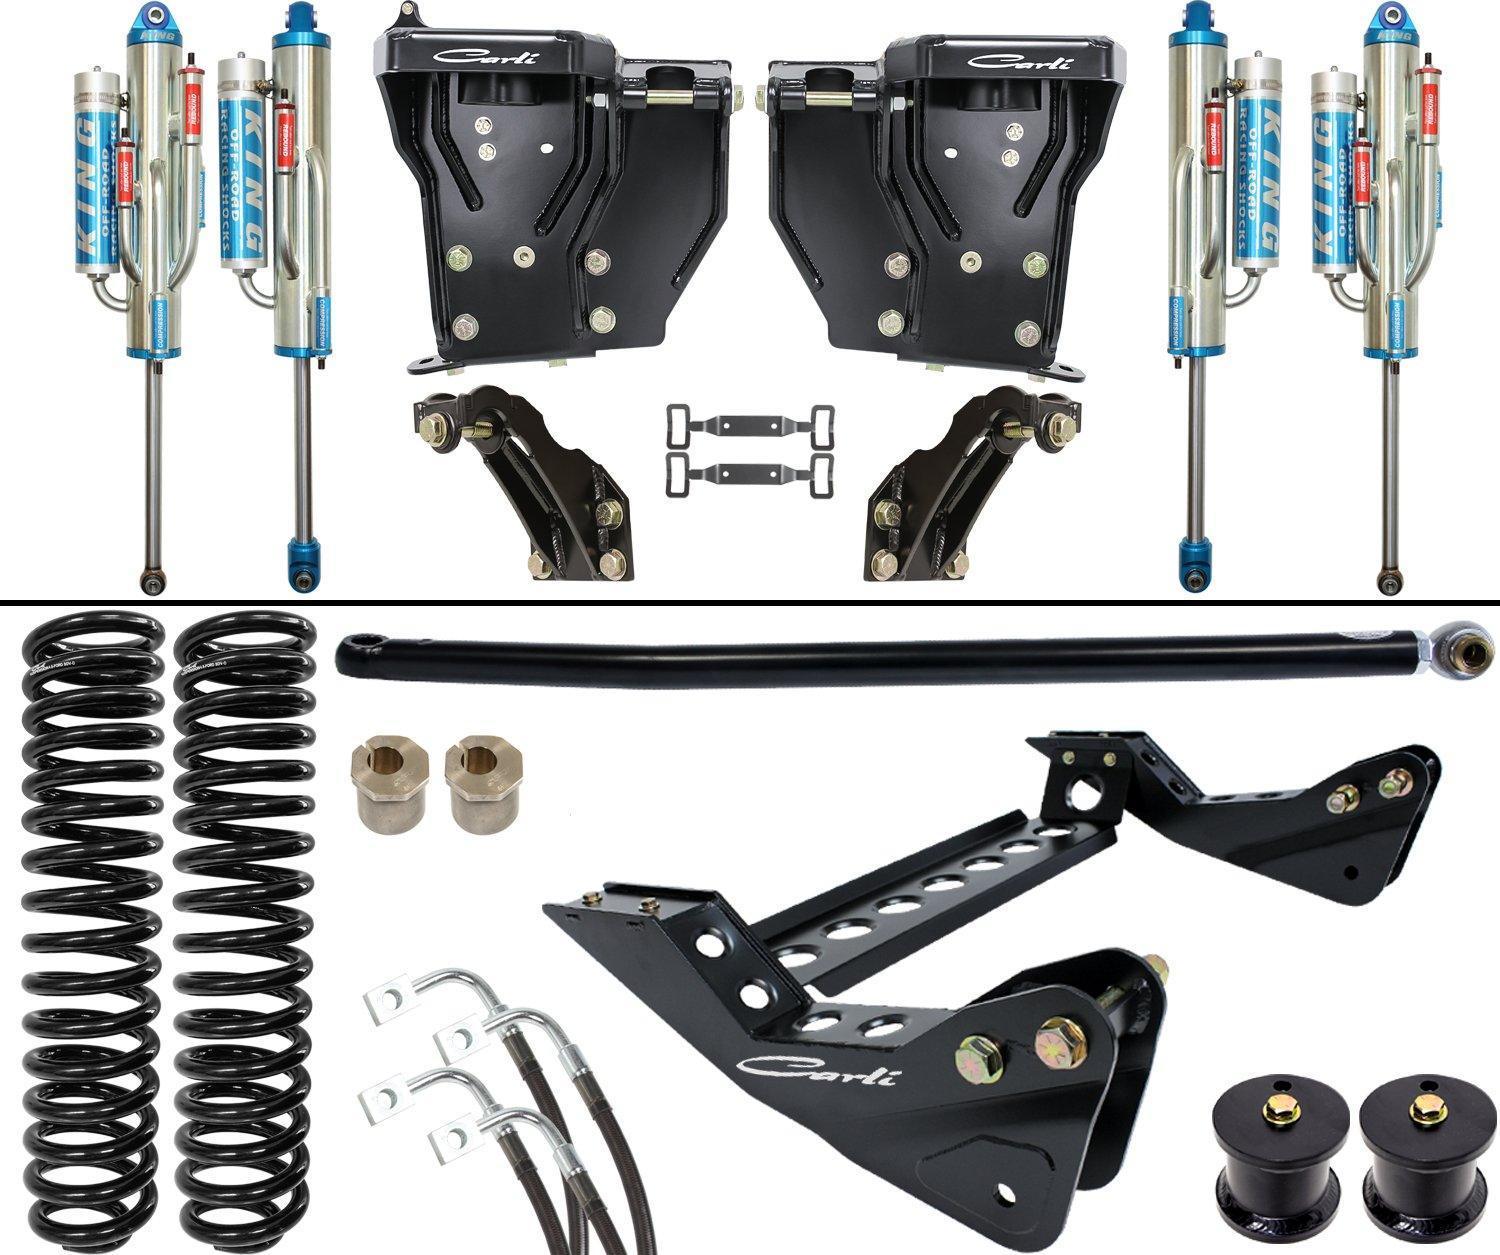 '08-10 Ford F250/350 3.0 Unchained System-4.5" Lift Suspension Carli Suspension parts